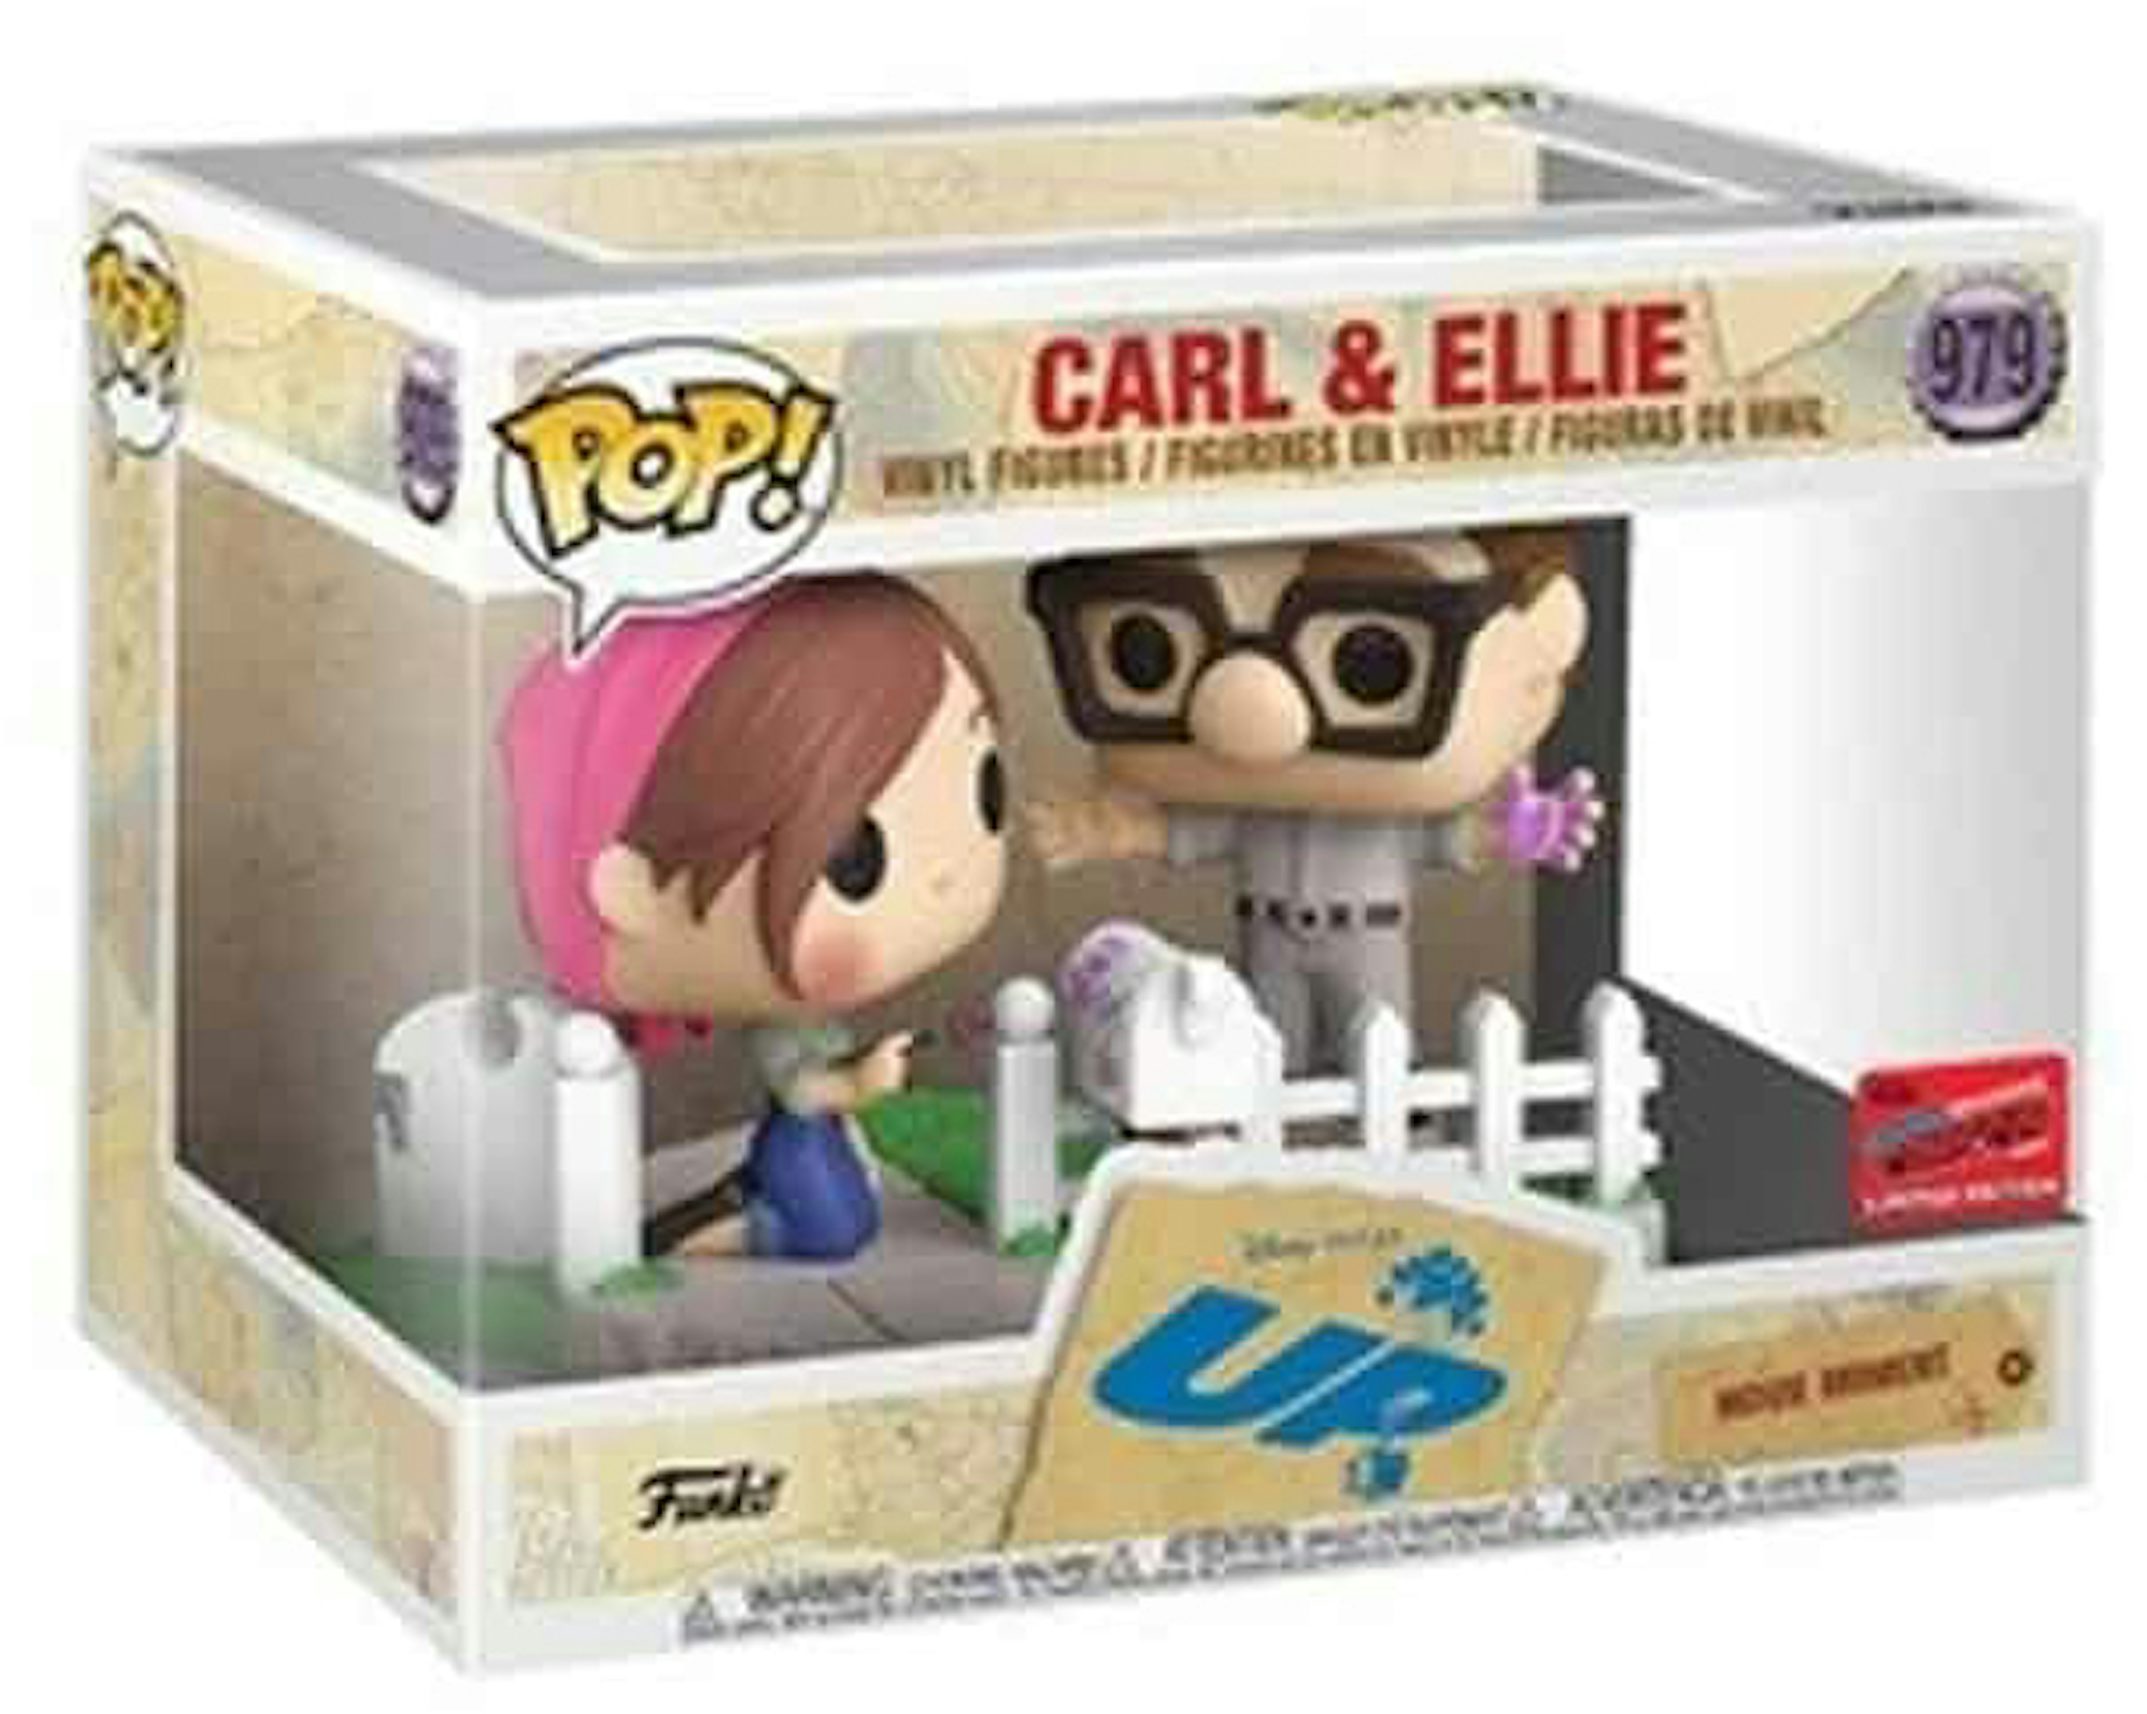 Funko Pop! Disney Carl and Ellie Movie Moment NYCC Exclusive Figure #979 -  US